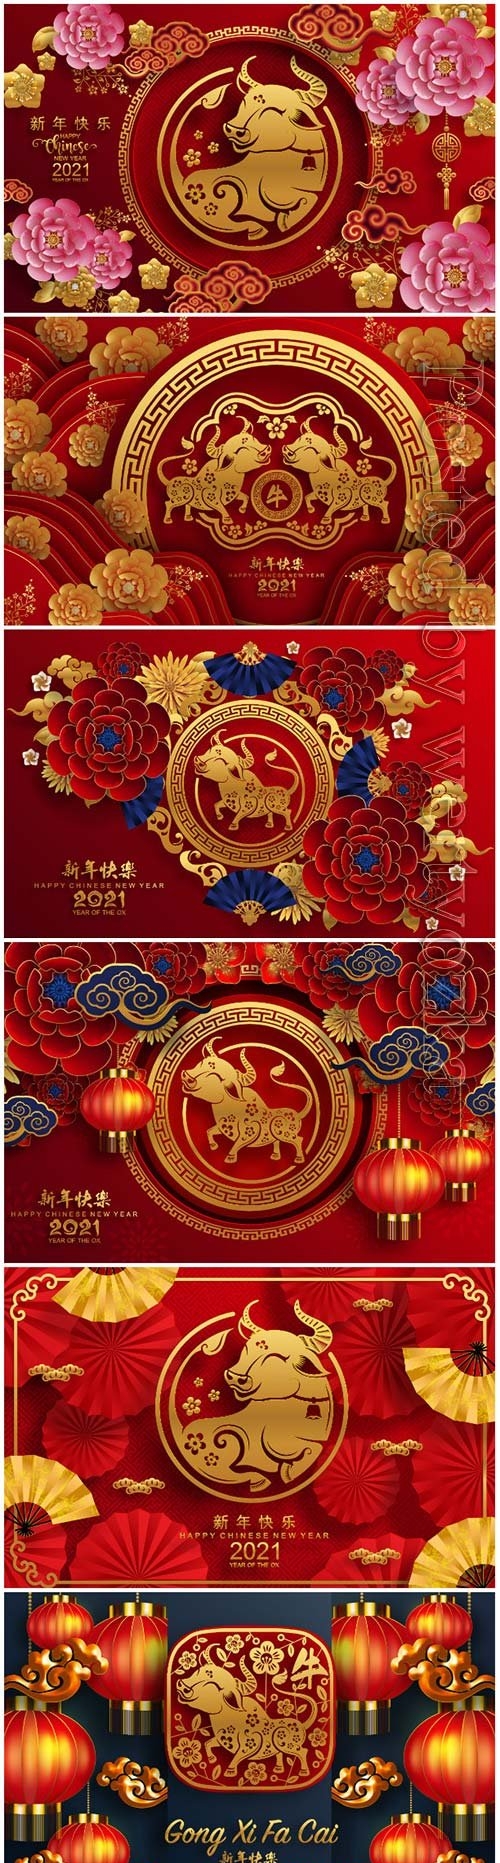 Chinese new year 2021 greeting vector card